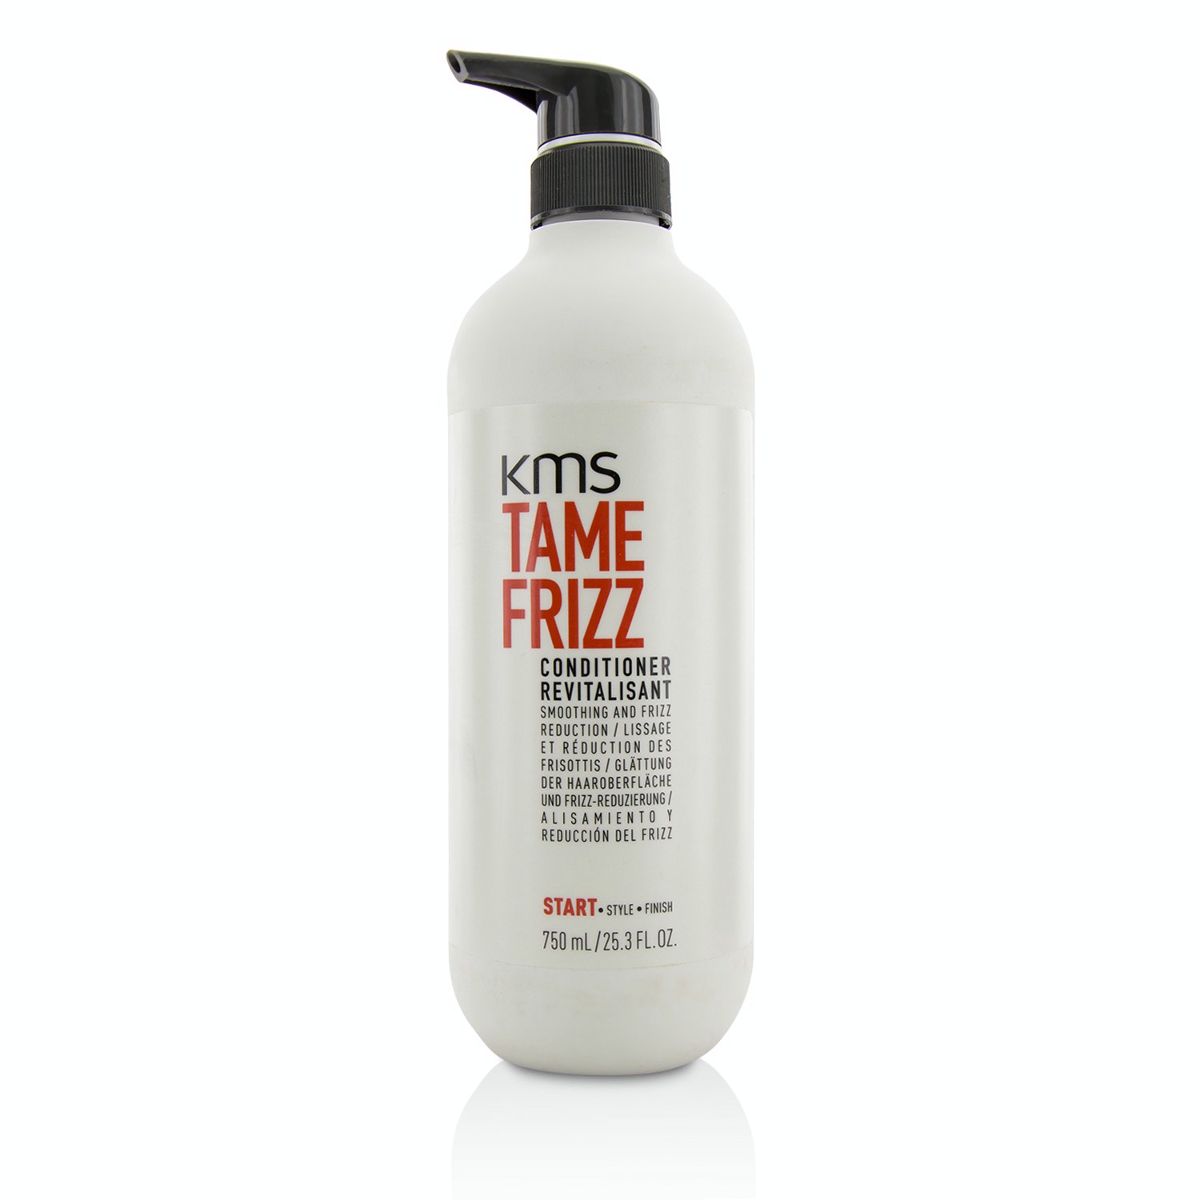 Tame Frizz Conditioner (Smoothing and Frizz) KMS California Image